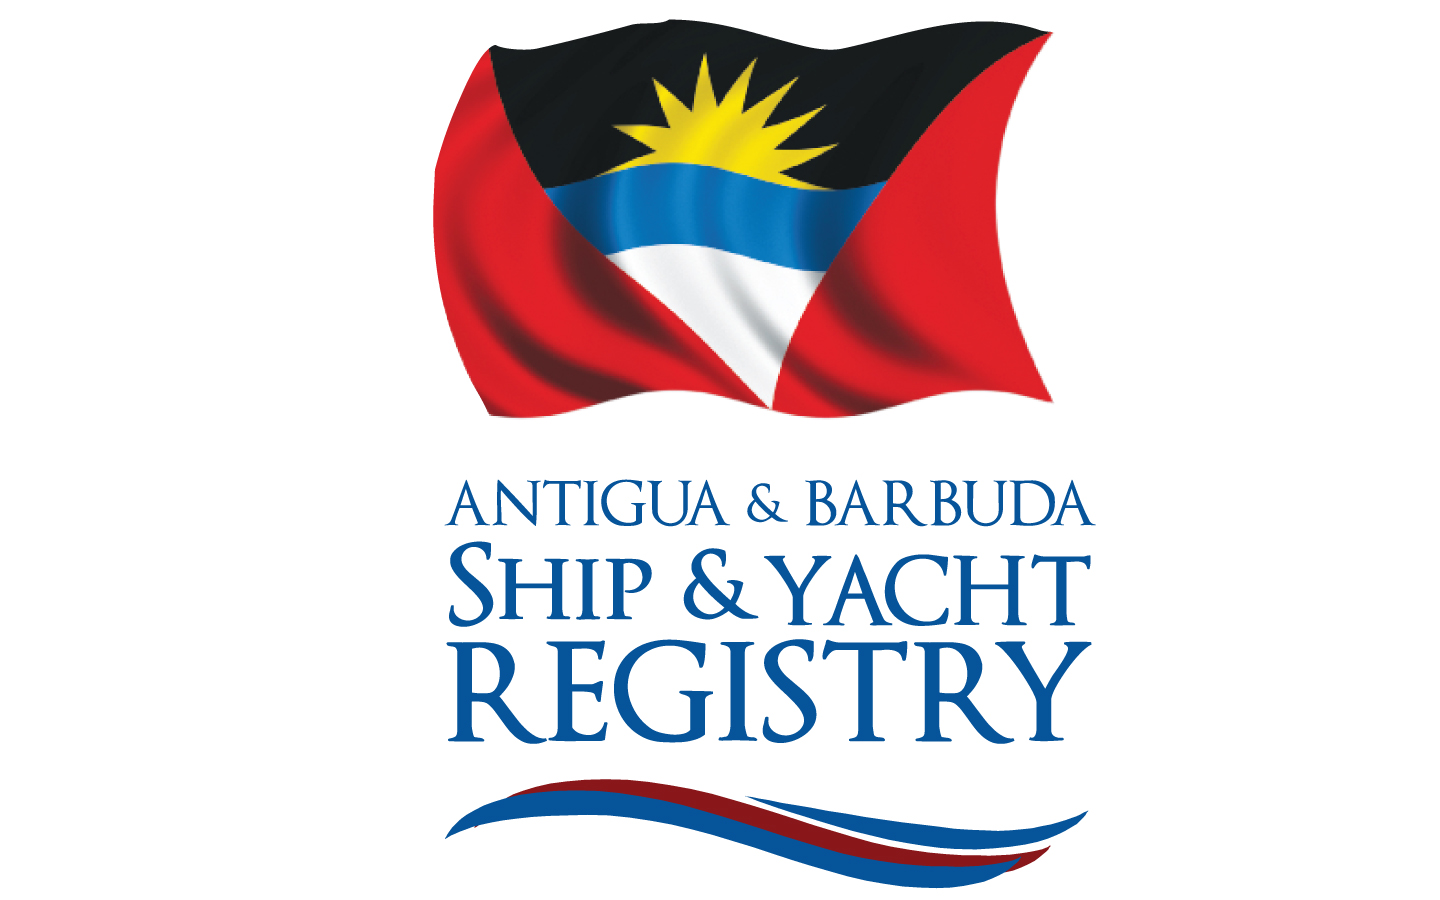 Antigua and Barbuda Department Of Marine Services and Merchant Shipping (ADOMS)